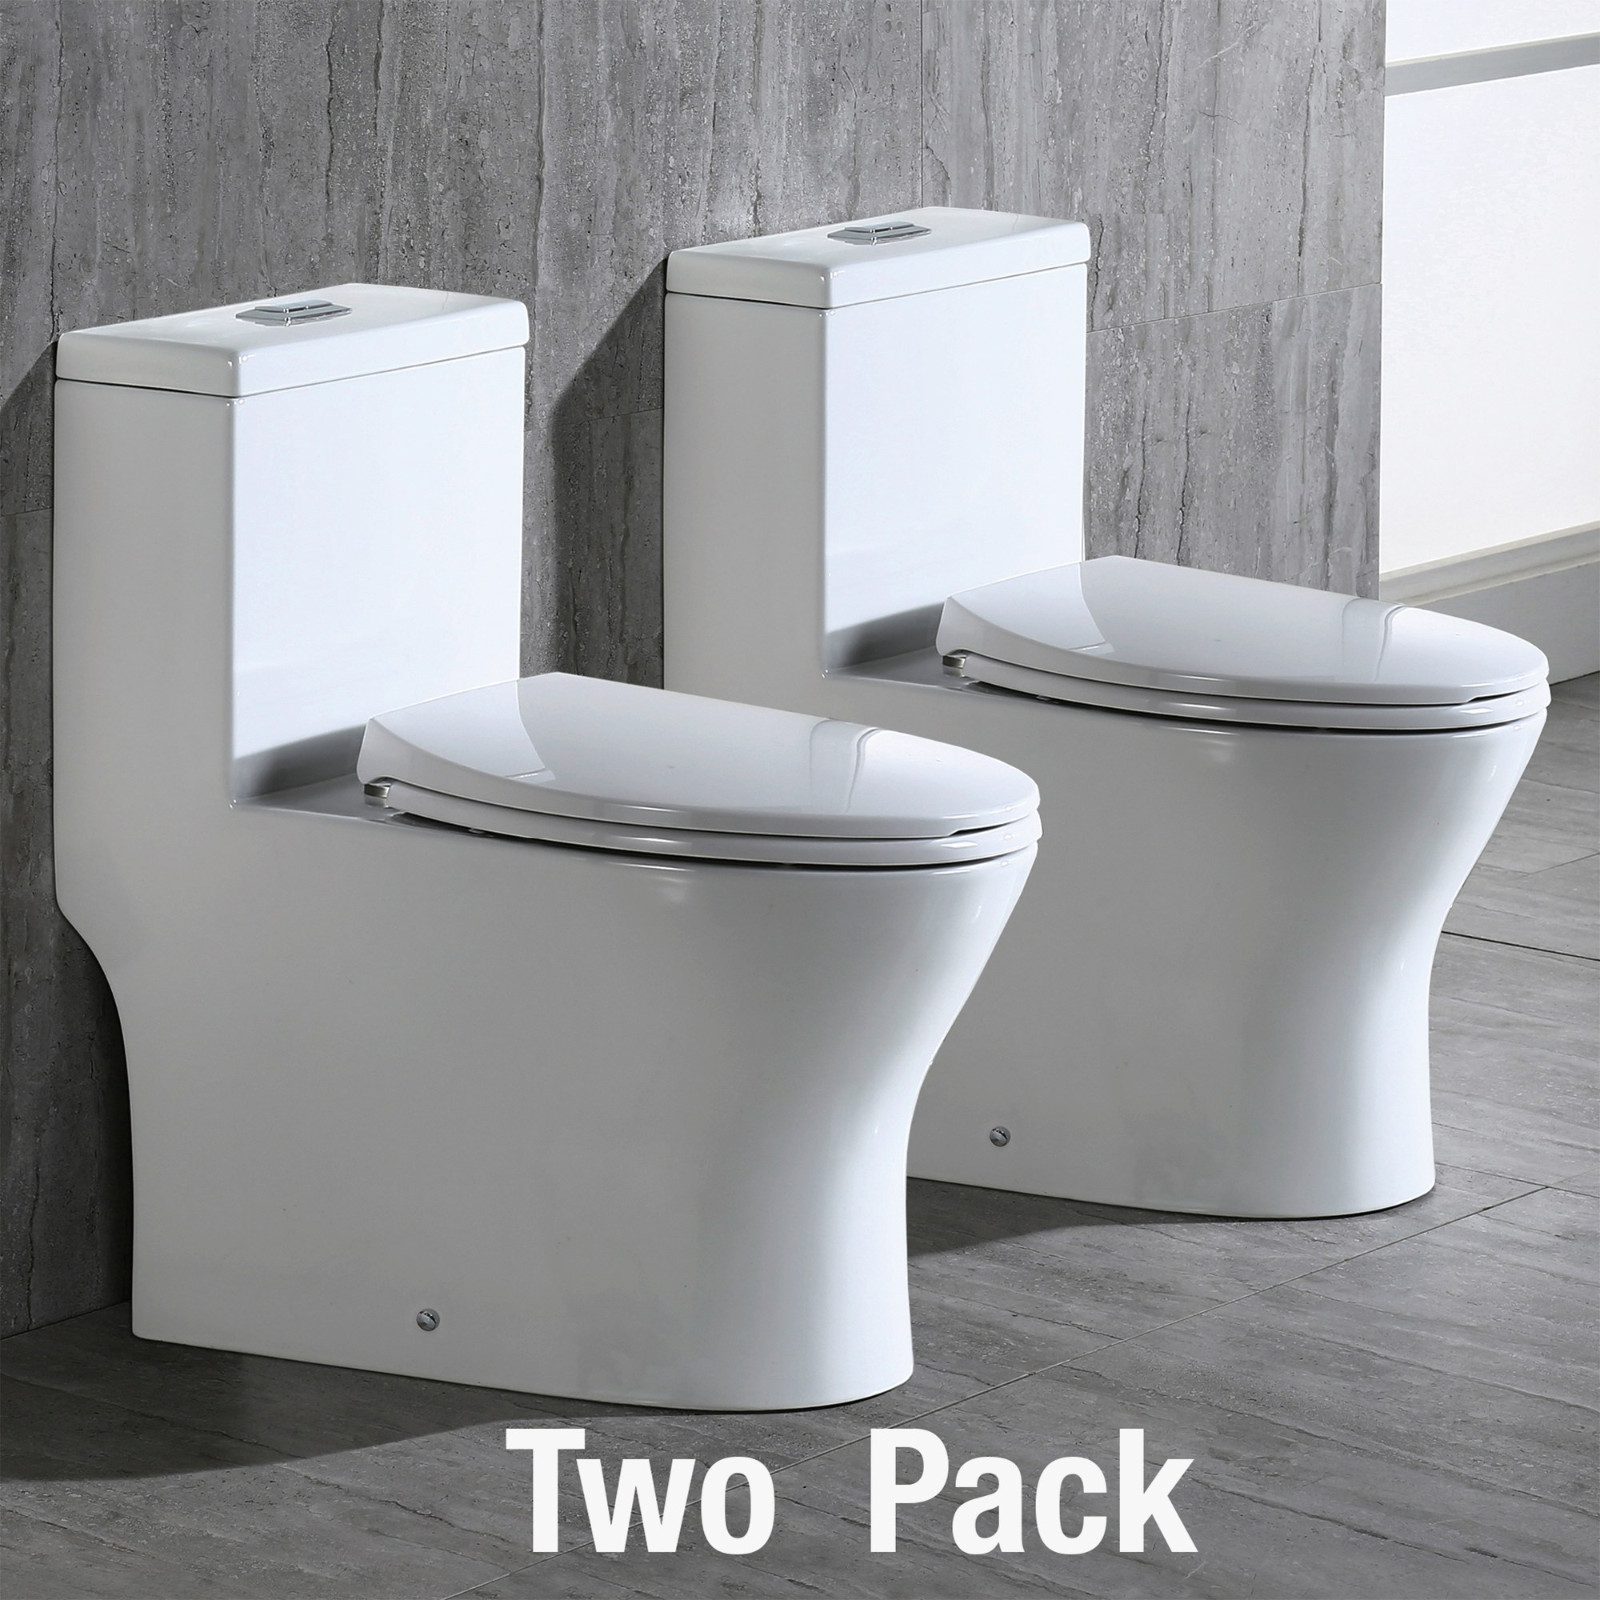  WOODBRIDGE Moder Design, Elongated One piece Toilet Dual flush 1.0/1.6 GPF,with Soft Closing Seat, white, T-0032(2 -Pack)_6467